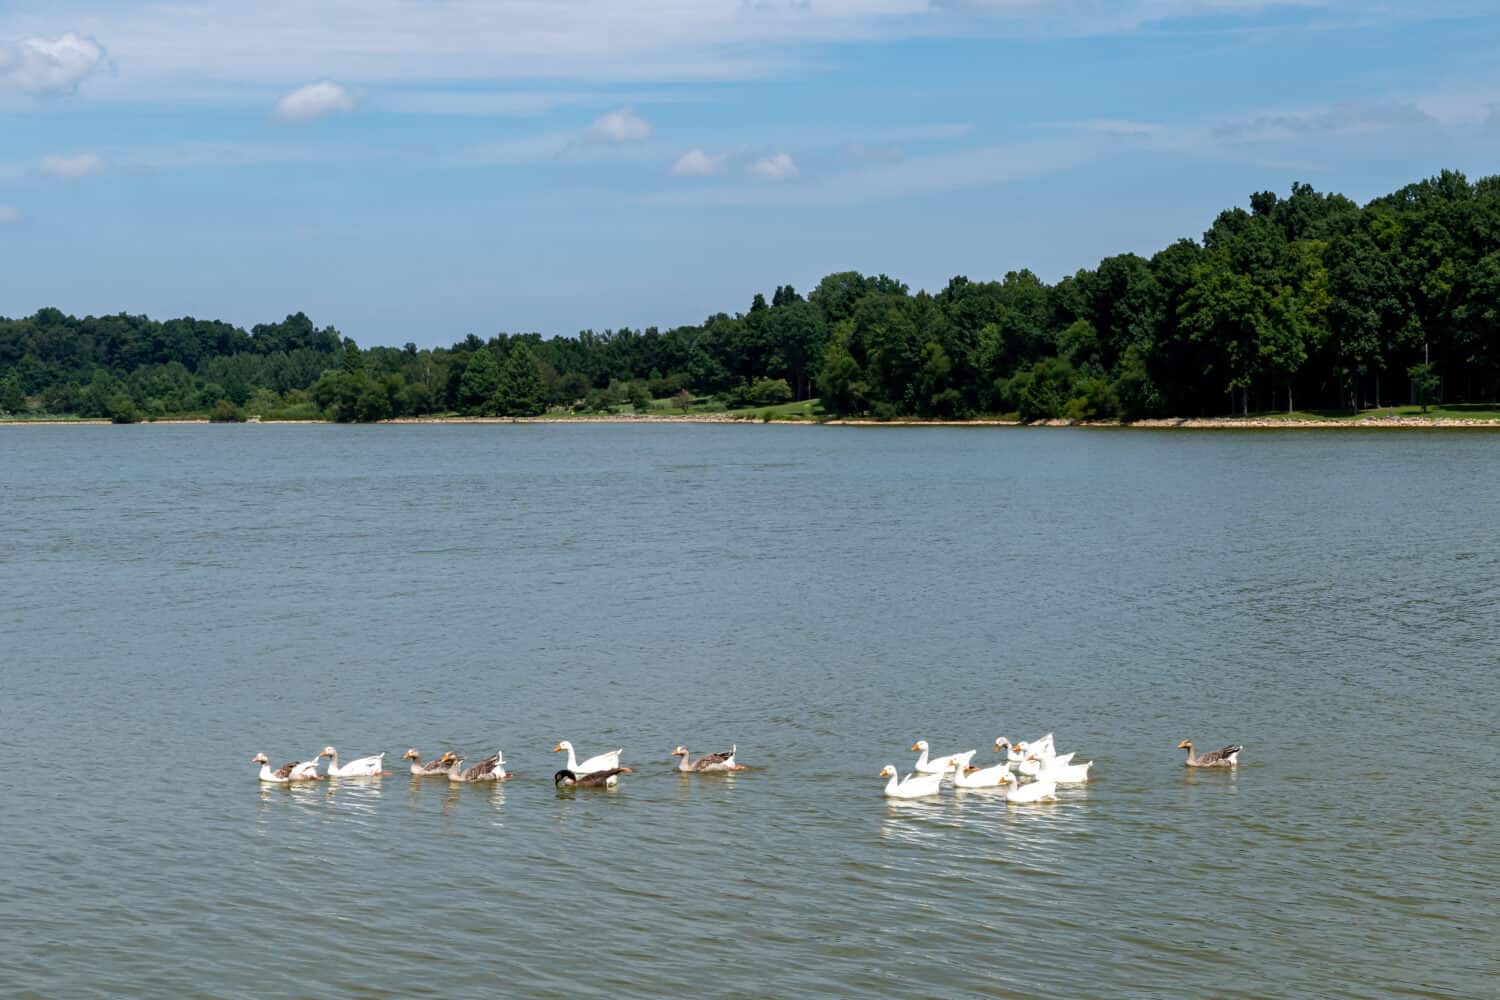 Adorable geese swim across Freeman Lake in Elizabethtown, KY on a beautiful sunny summer day.